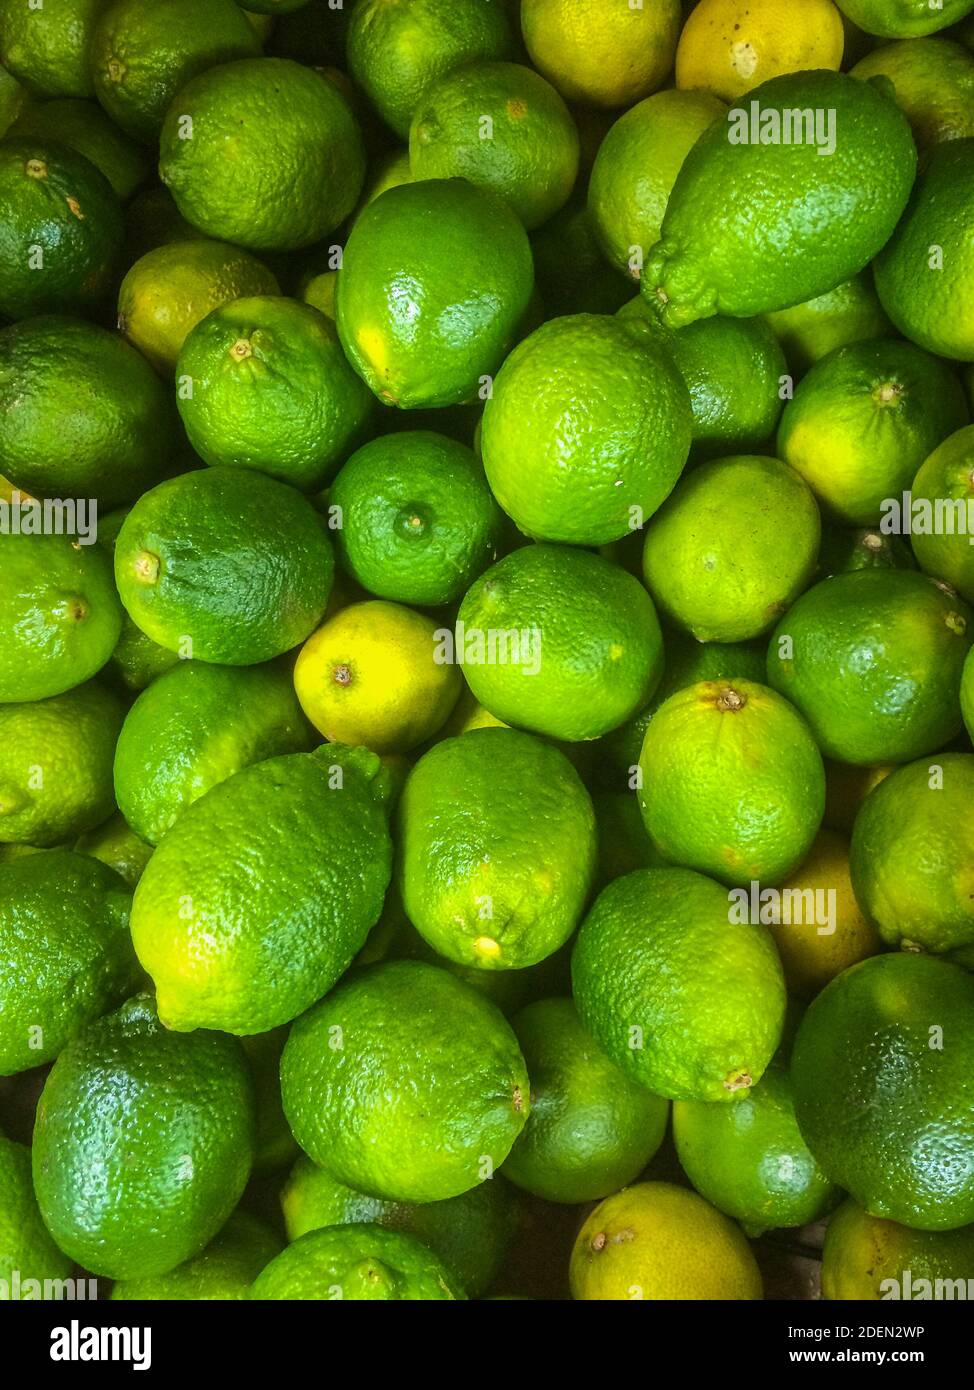 Close up of a pile of limes Stock Photo